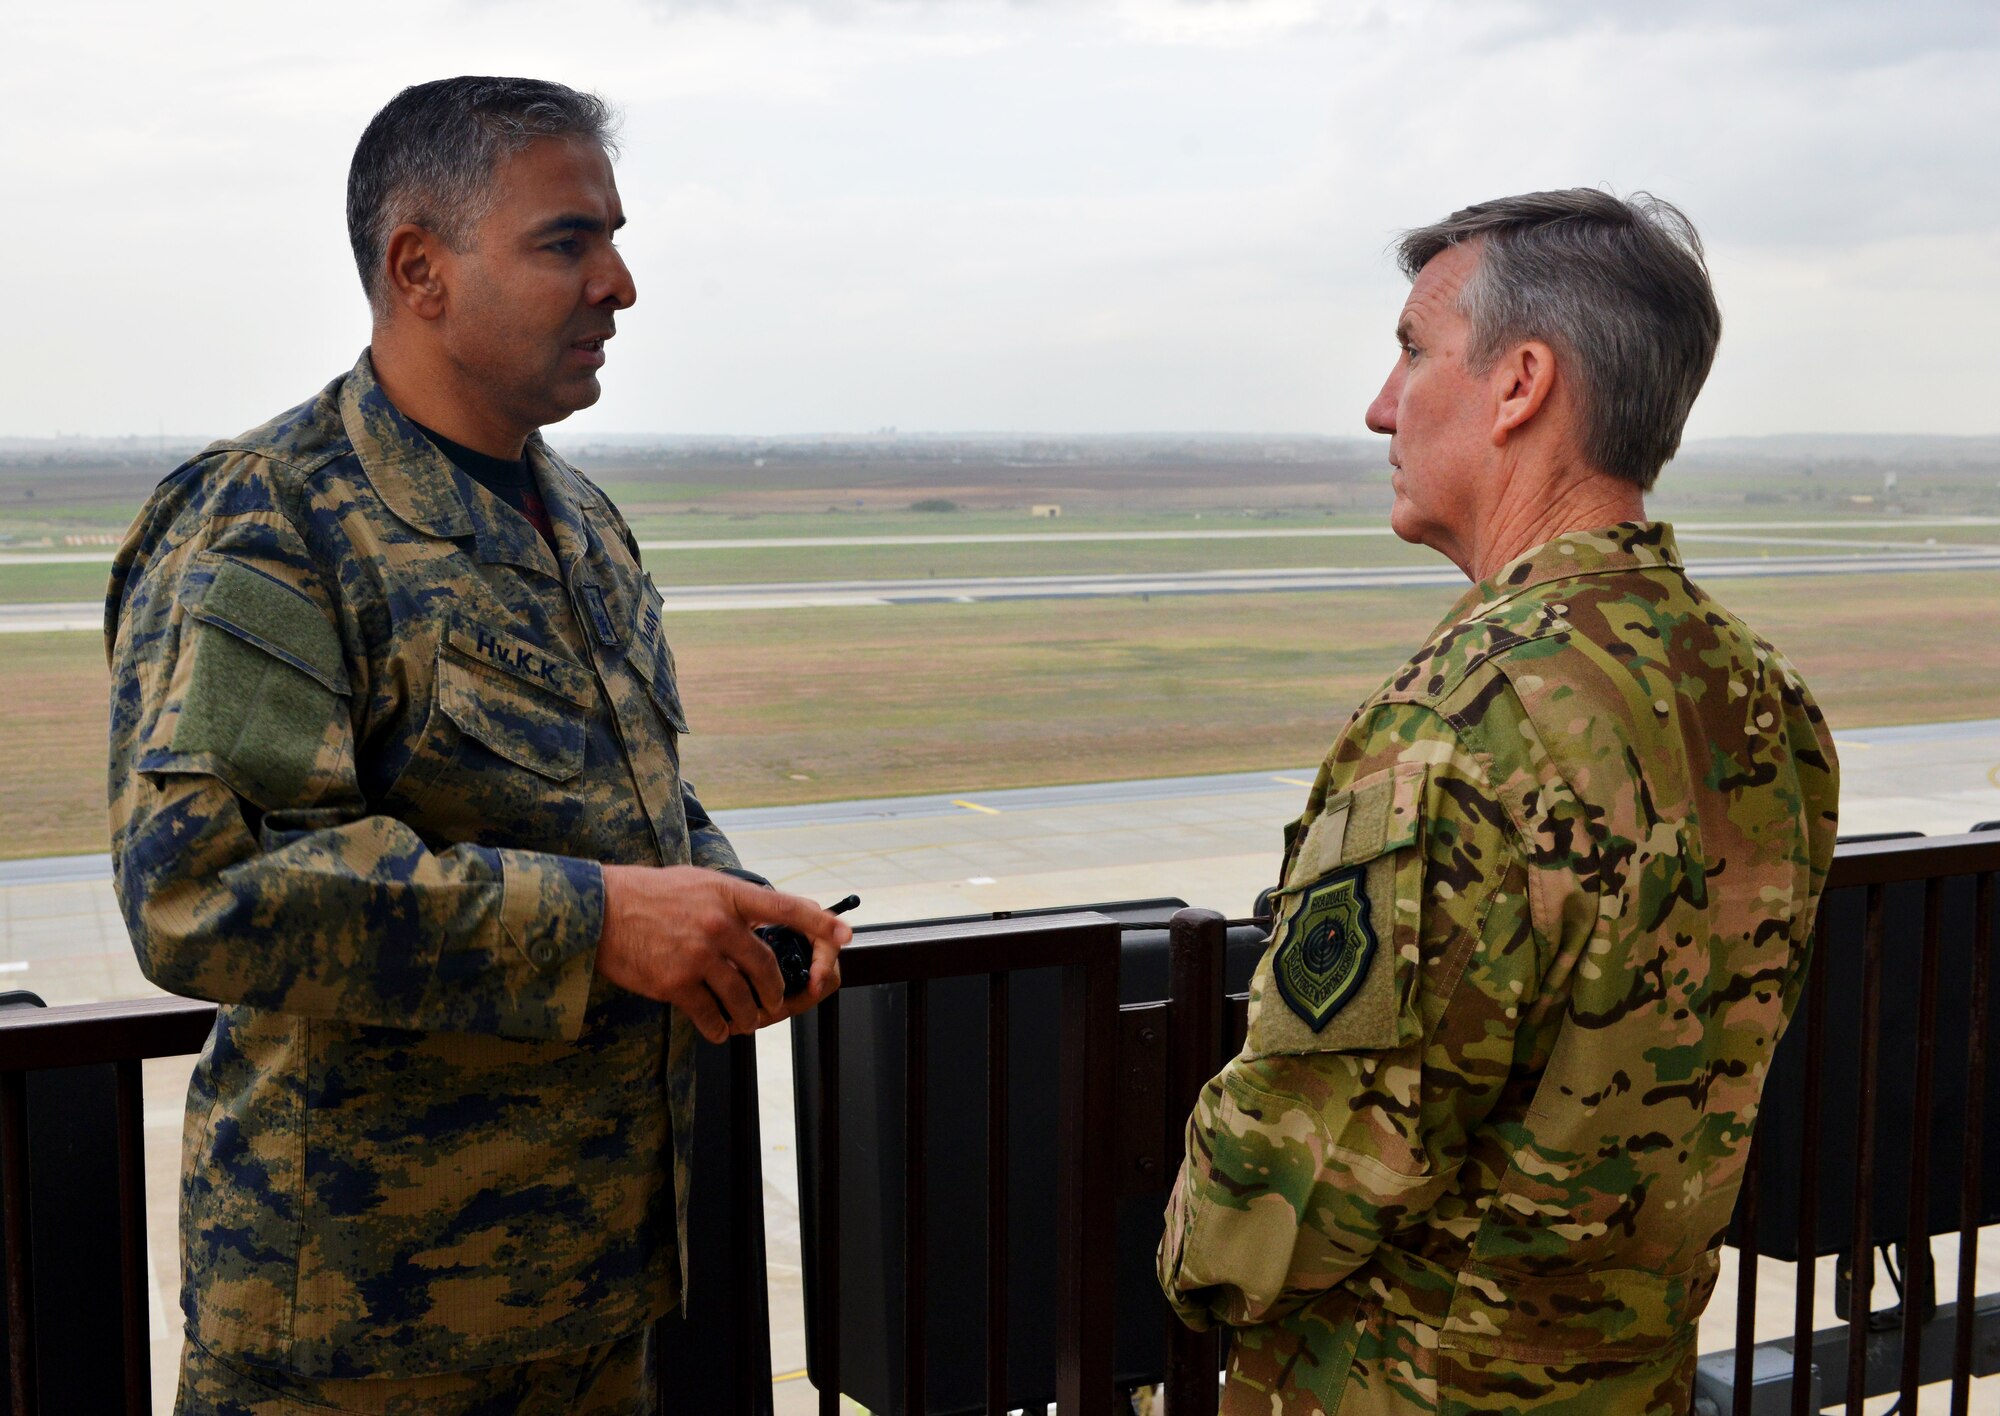 Brig. Gen. Bekir Ercan Van, 10th Tanker Base Command commander, discusses base operations with U.S. Air Force Gen. Hawk Carlisle, commander of Air Combat Command, during a base visit Oct. 22, 2015, at Incirlik Air Base, Turkey. As part of his visit, Carlisle met with both, U.S. and Turkish air forces leadership to learn more about their partnership at Incirlik AB. (U.S. Air Force photo by Senior Airman Michael Battles/Released)